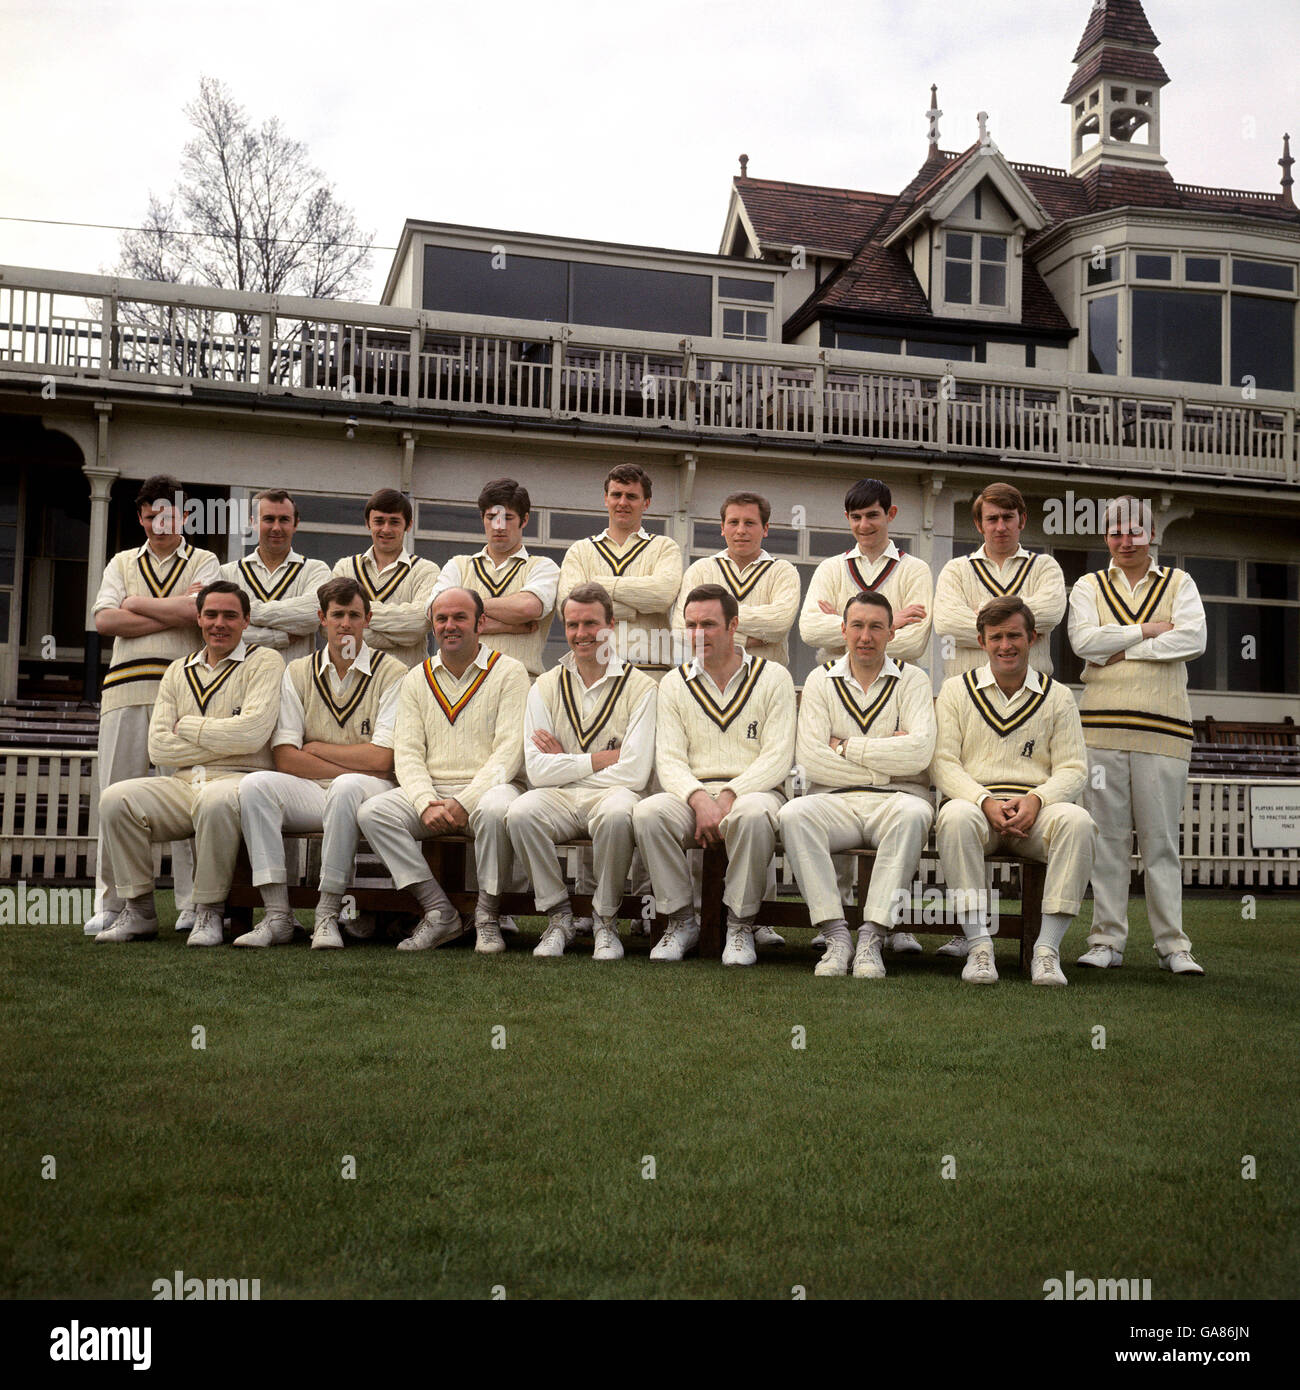 Warwickshire County Cricket Club Back Row: Flick, Abberley, Warner, Grey, Blenkiron, Gordon, McVicker, Hemmings, Bayley, Front Row: Jameson, Brown, Stewart, Smith (Captain), Bannister, Cartwright and Amiss. Stock Photo